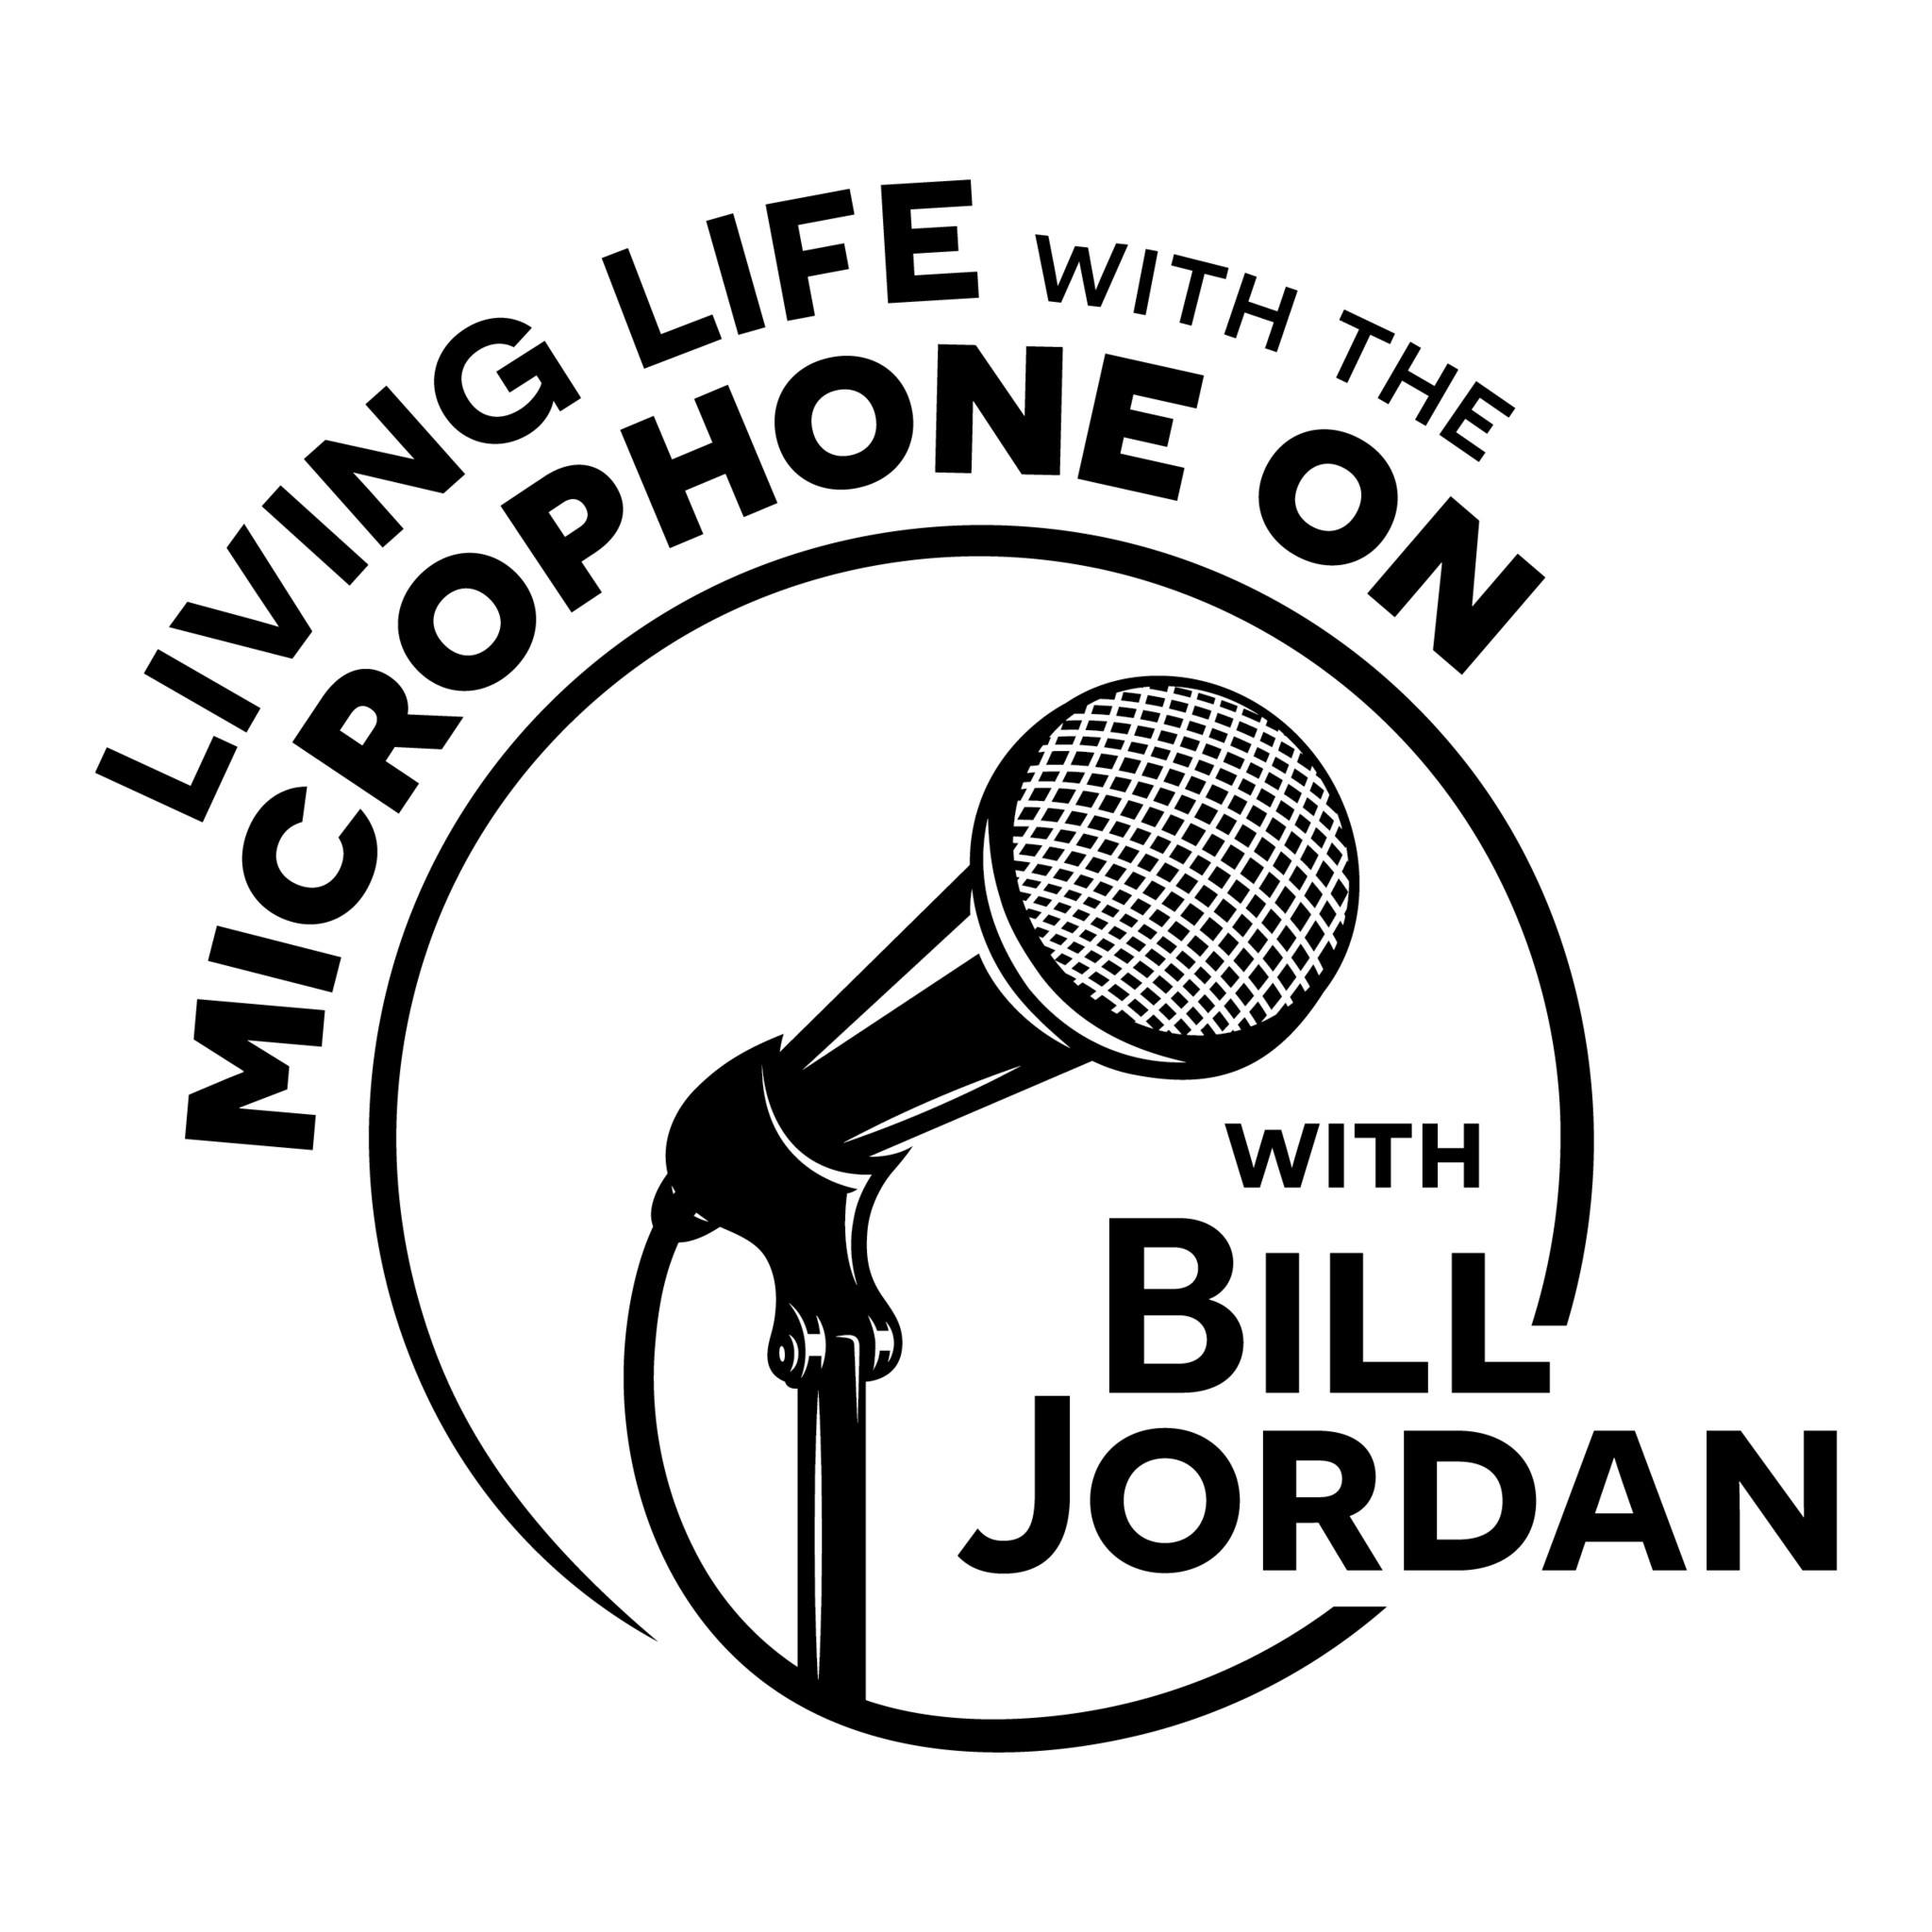 Ep83 - Living Life With The Microphone On with Bill Jordan